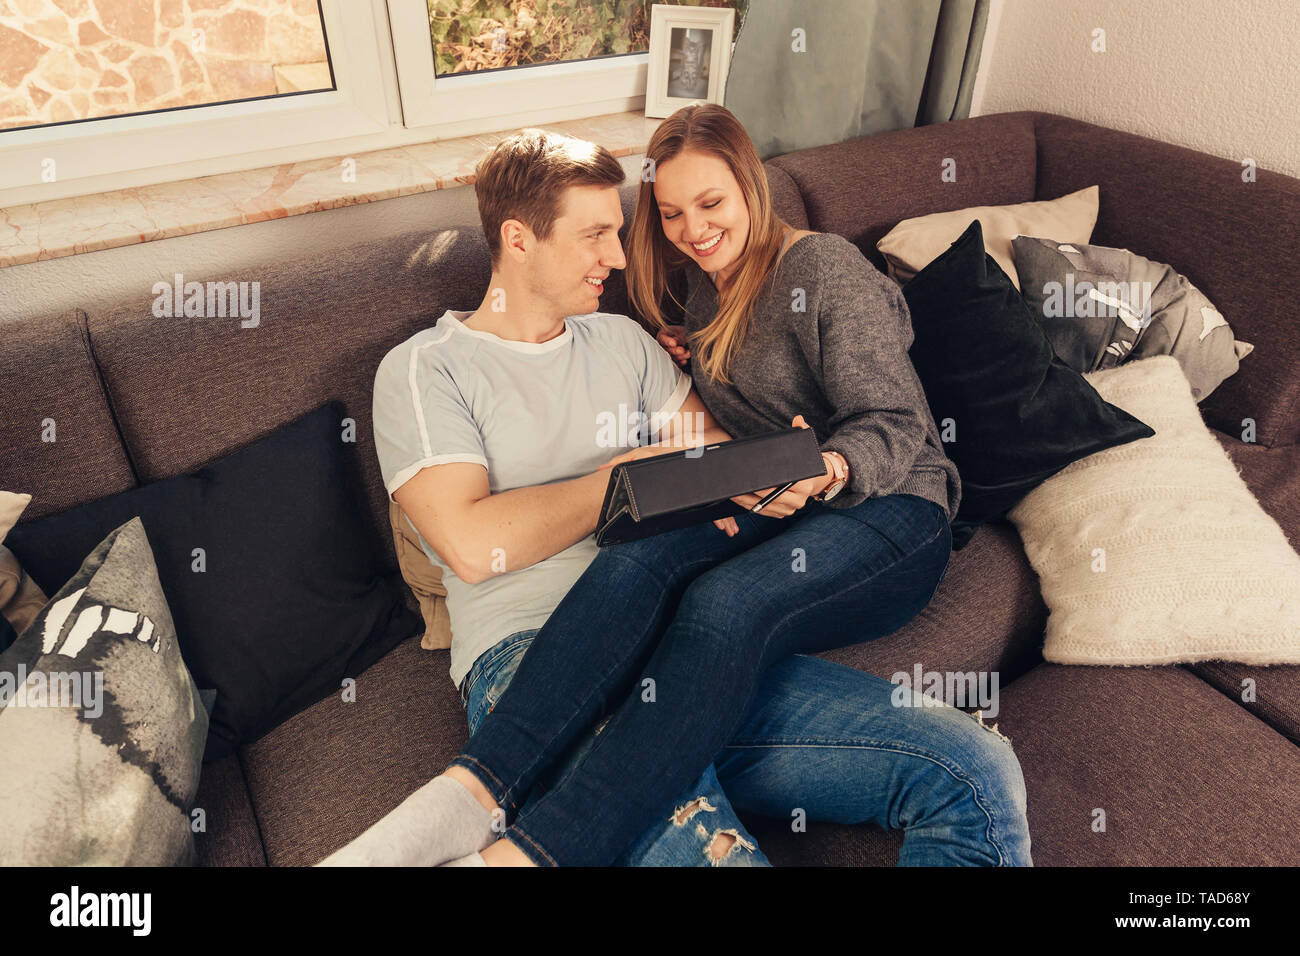 Young couple relaxing on sofa and using a tablet Stock Photo